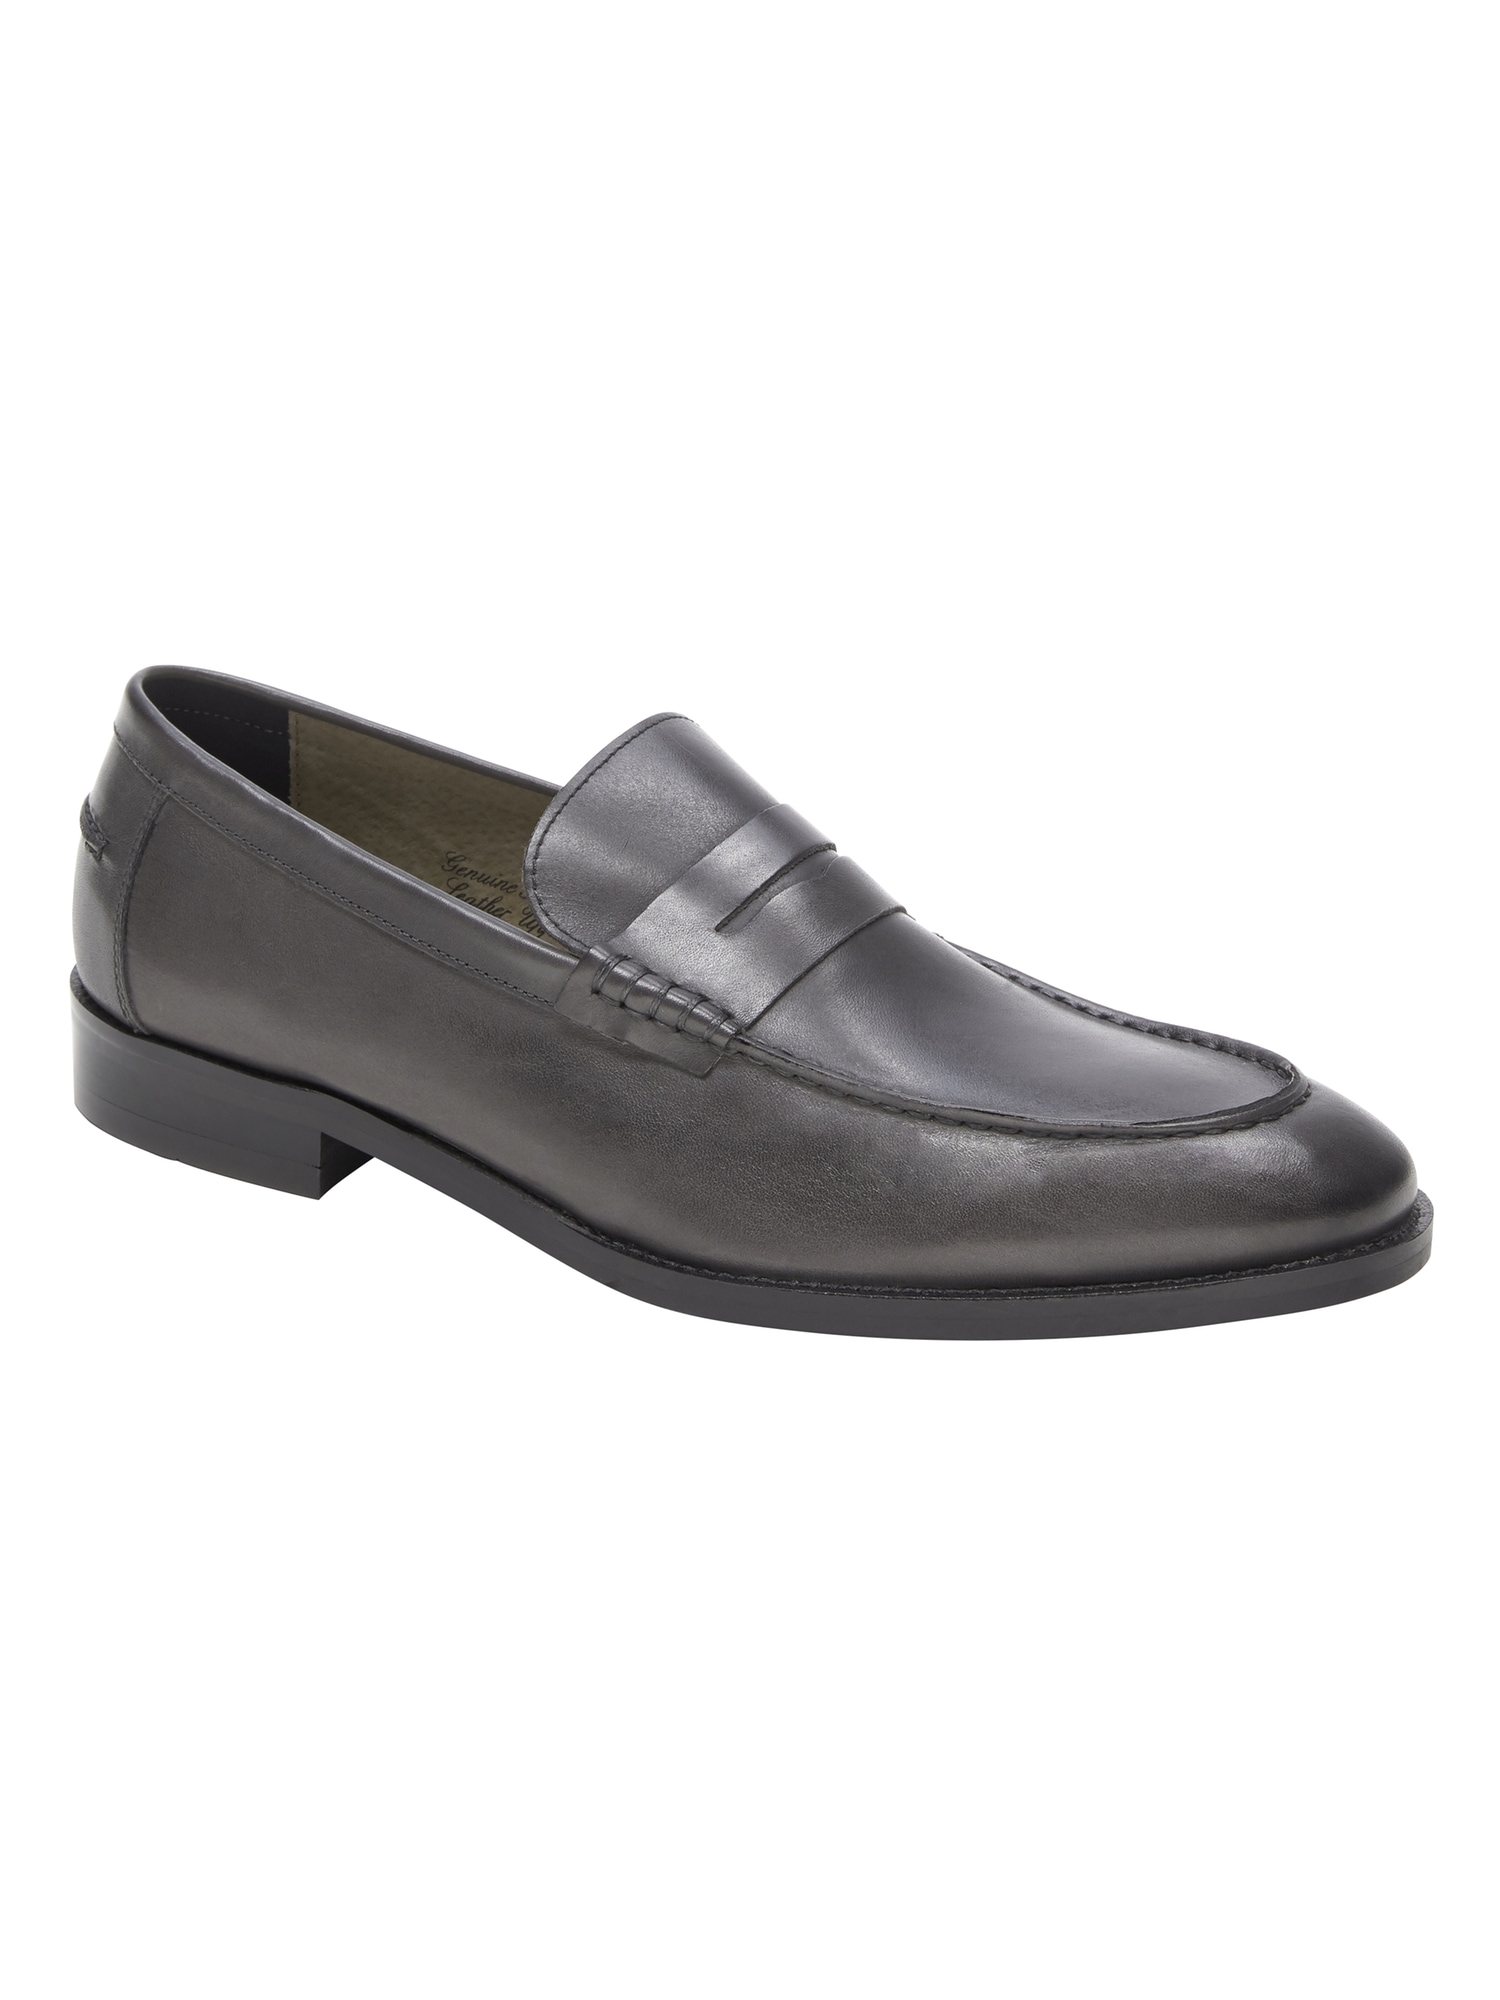 italian leather loafers mens